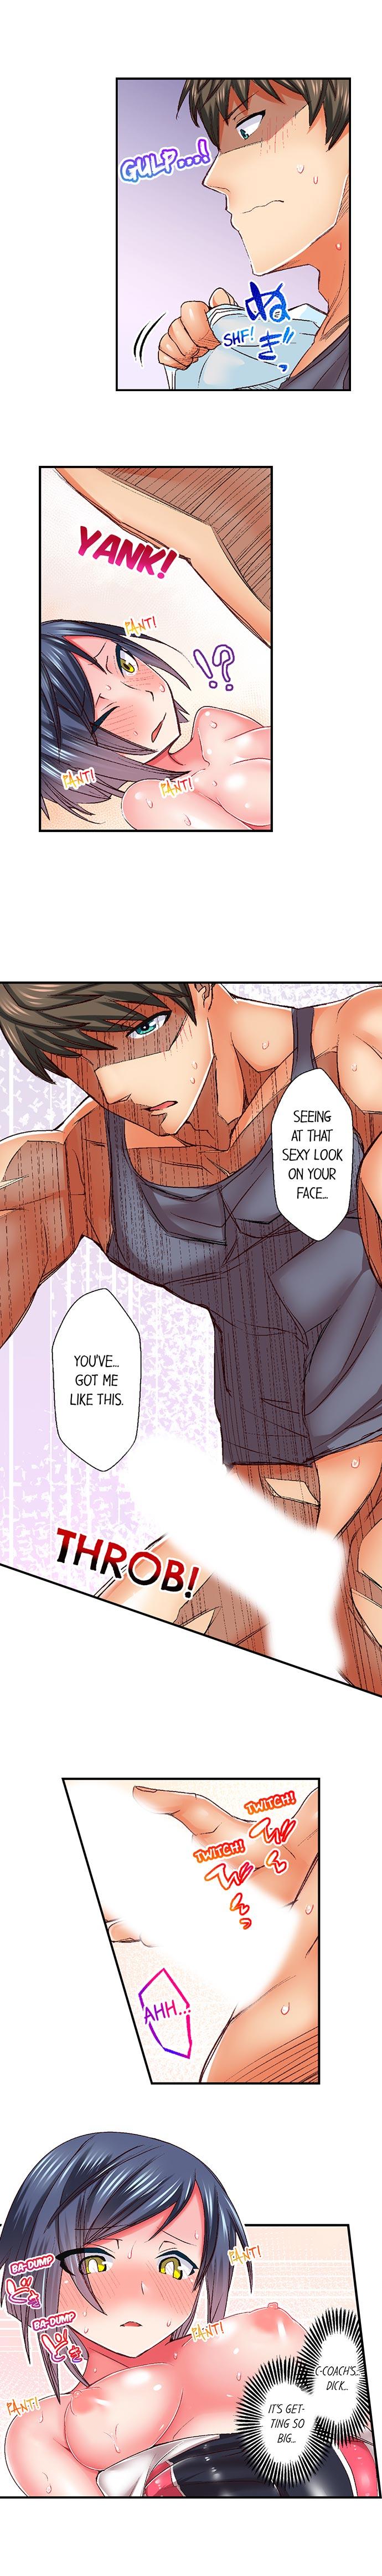 Athlete's Strong Sex Drive Ch. 1 - 12 24